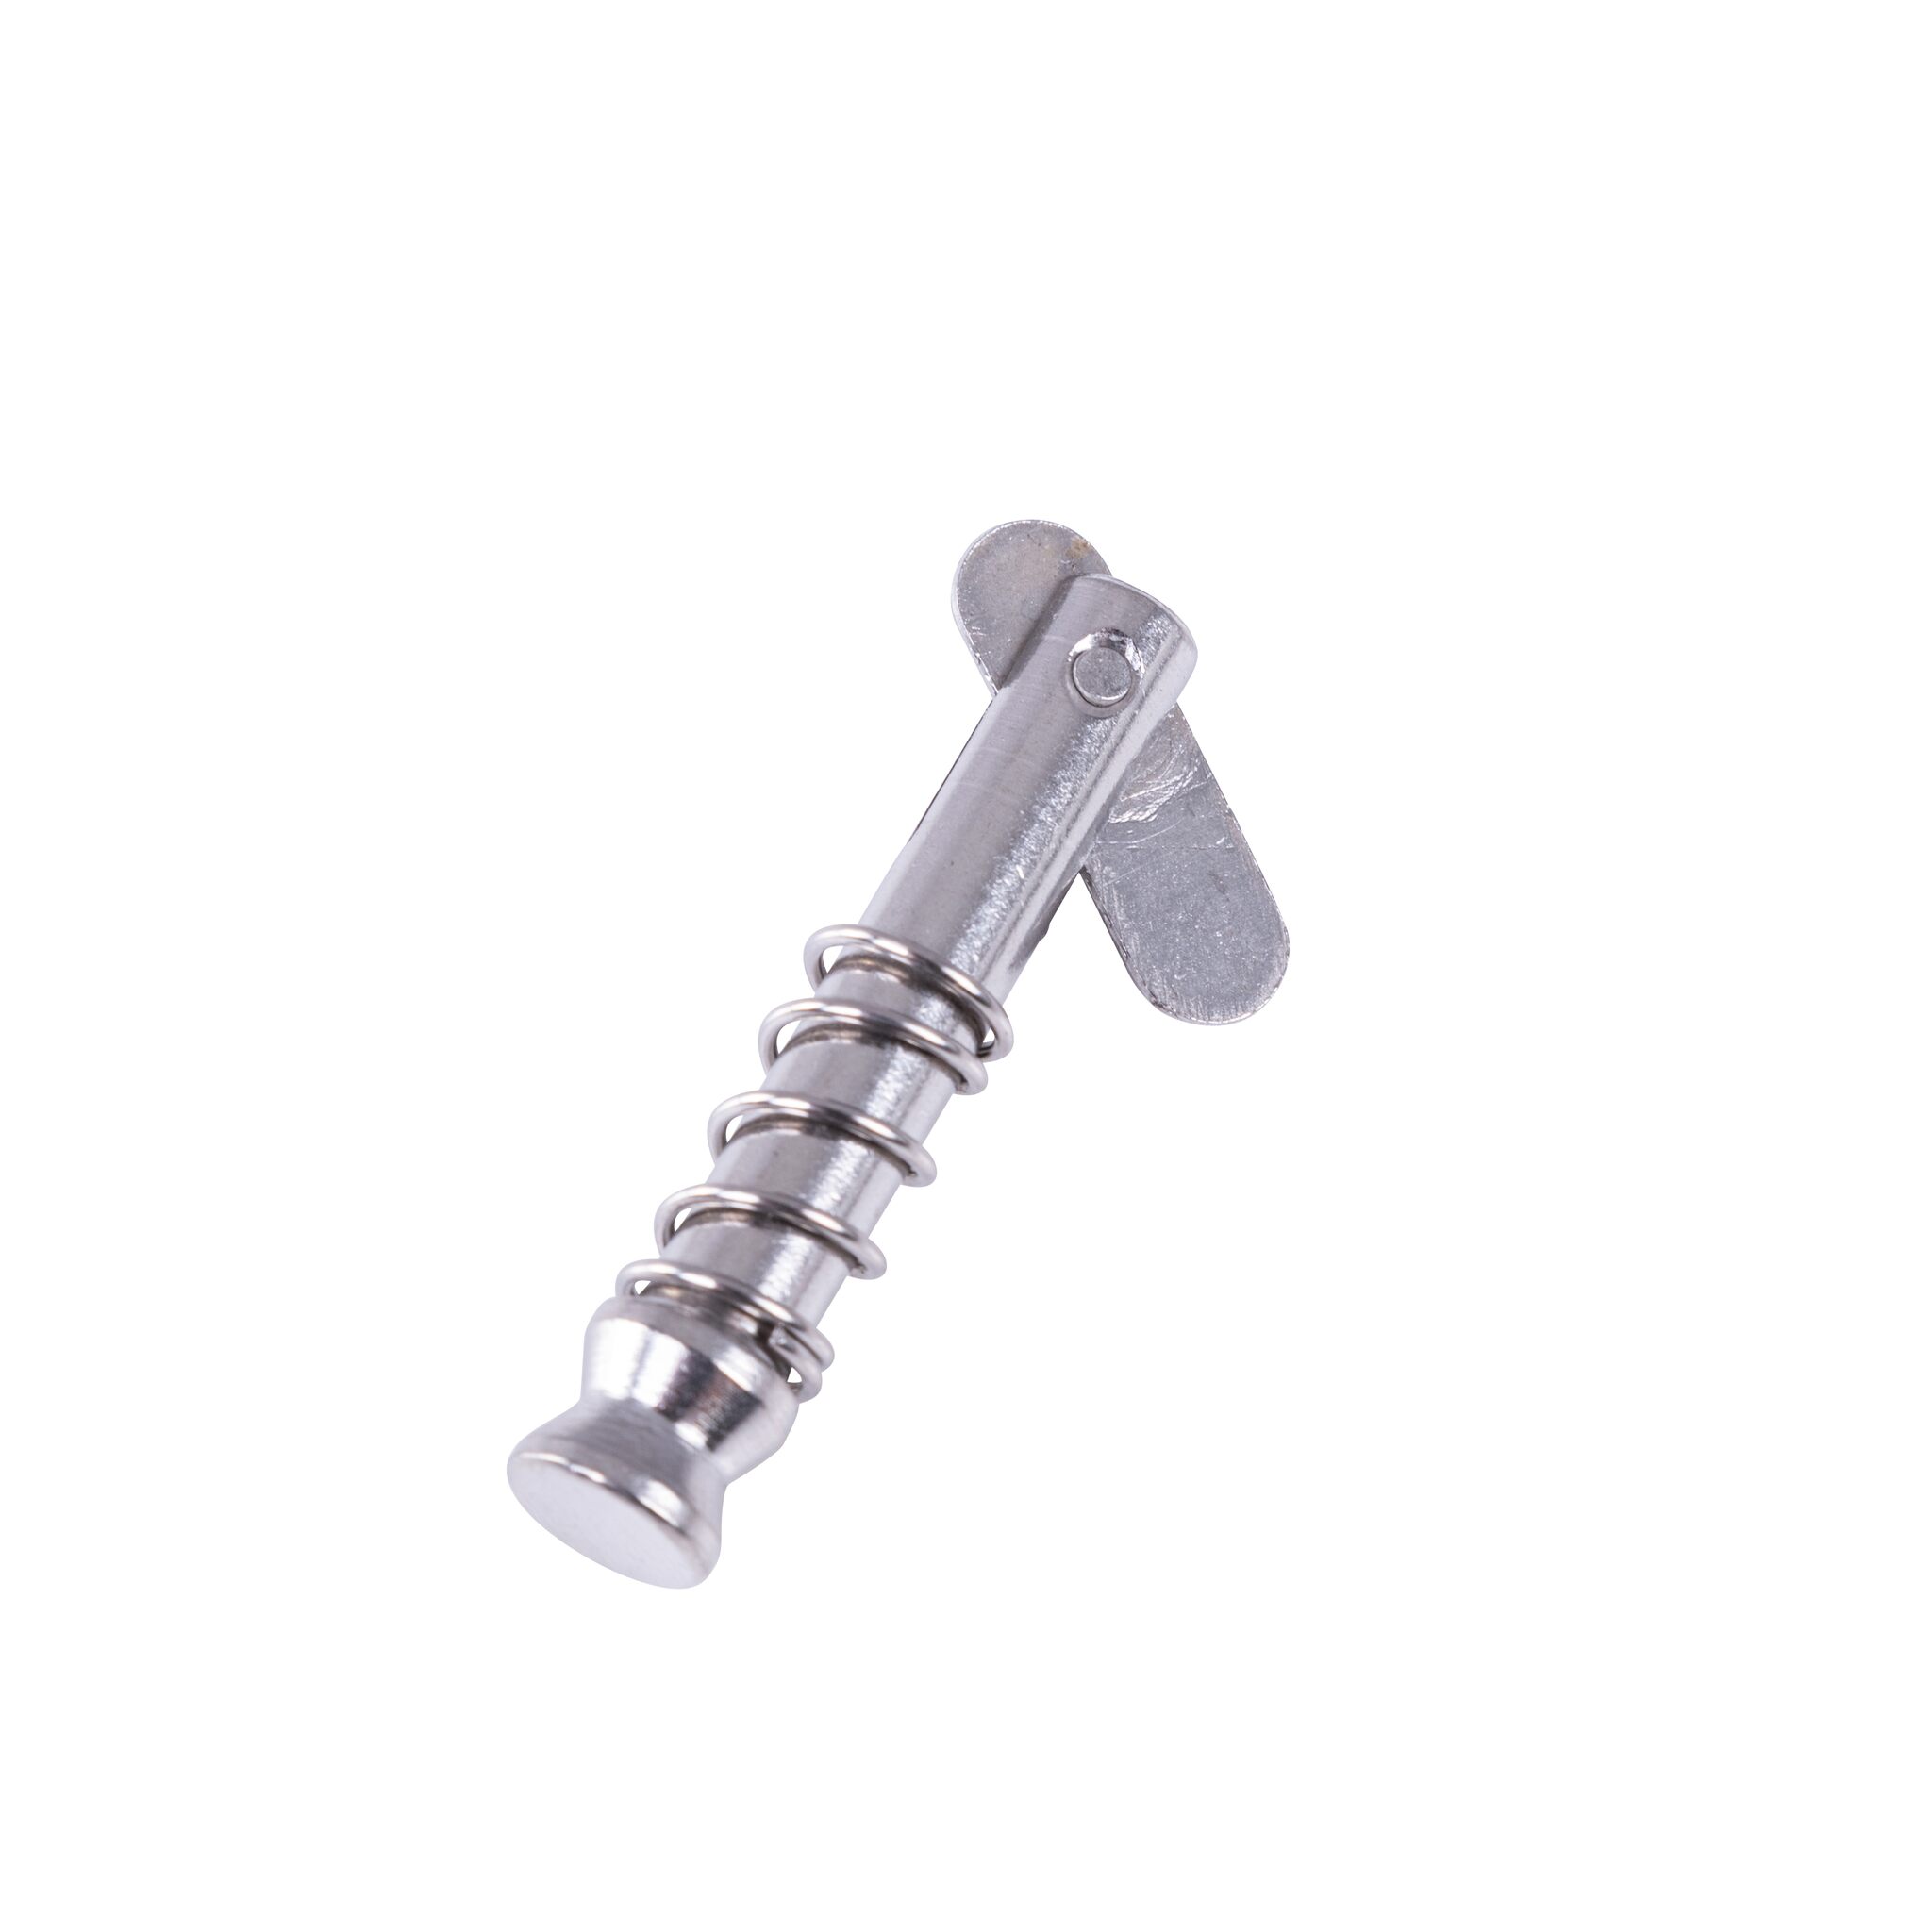 Replacement folding nose bolt